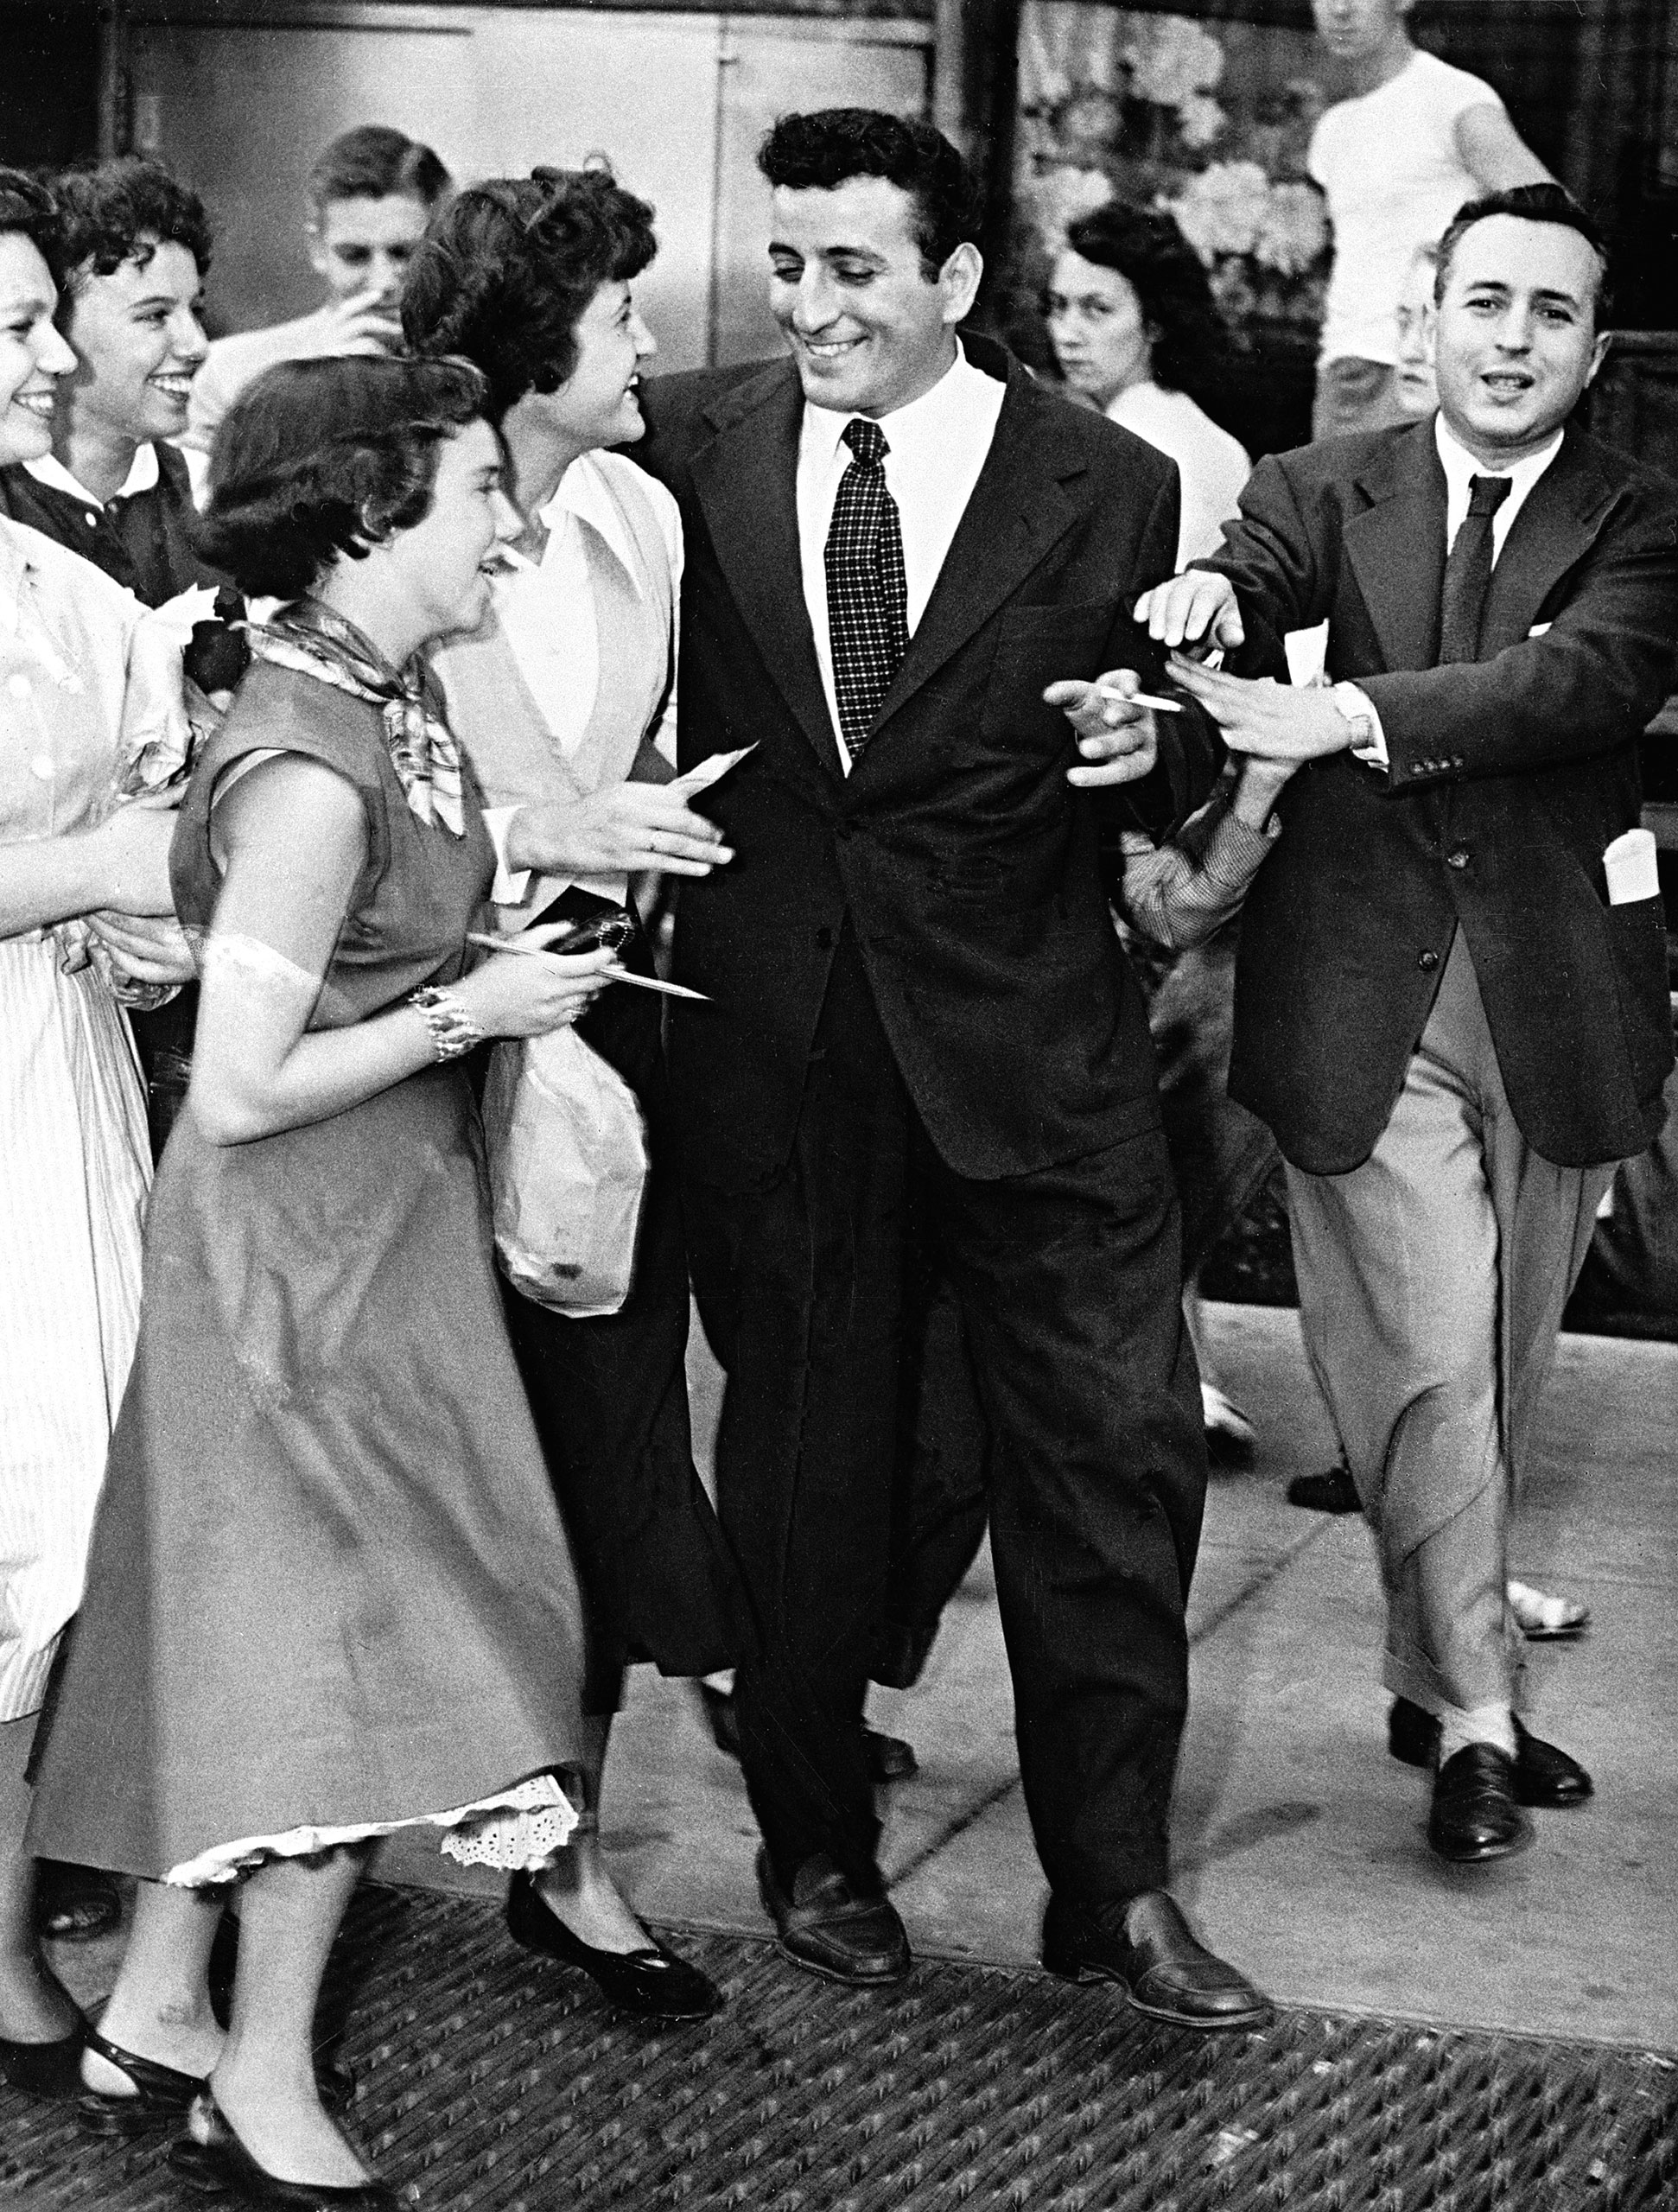 Singer Tony Bennett is approached by autograph seekers as he leaves a performance on Oct. 4, 1951.